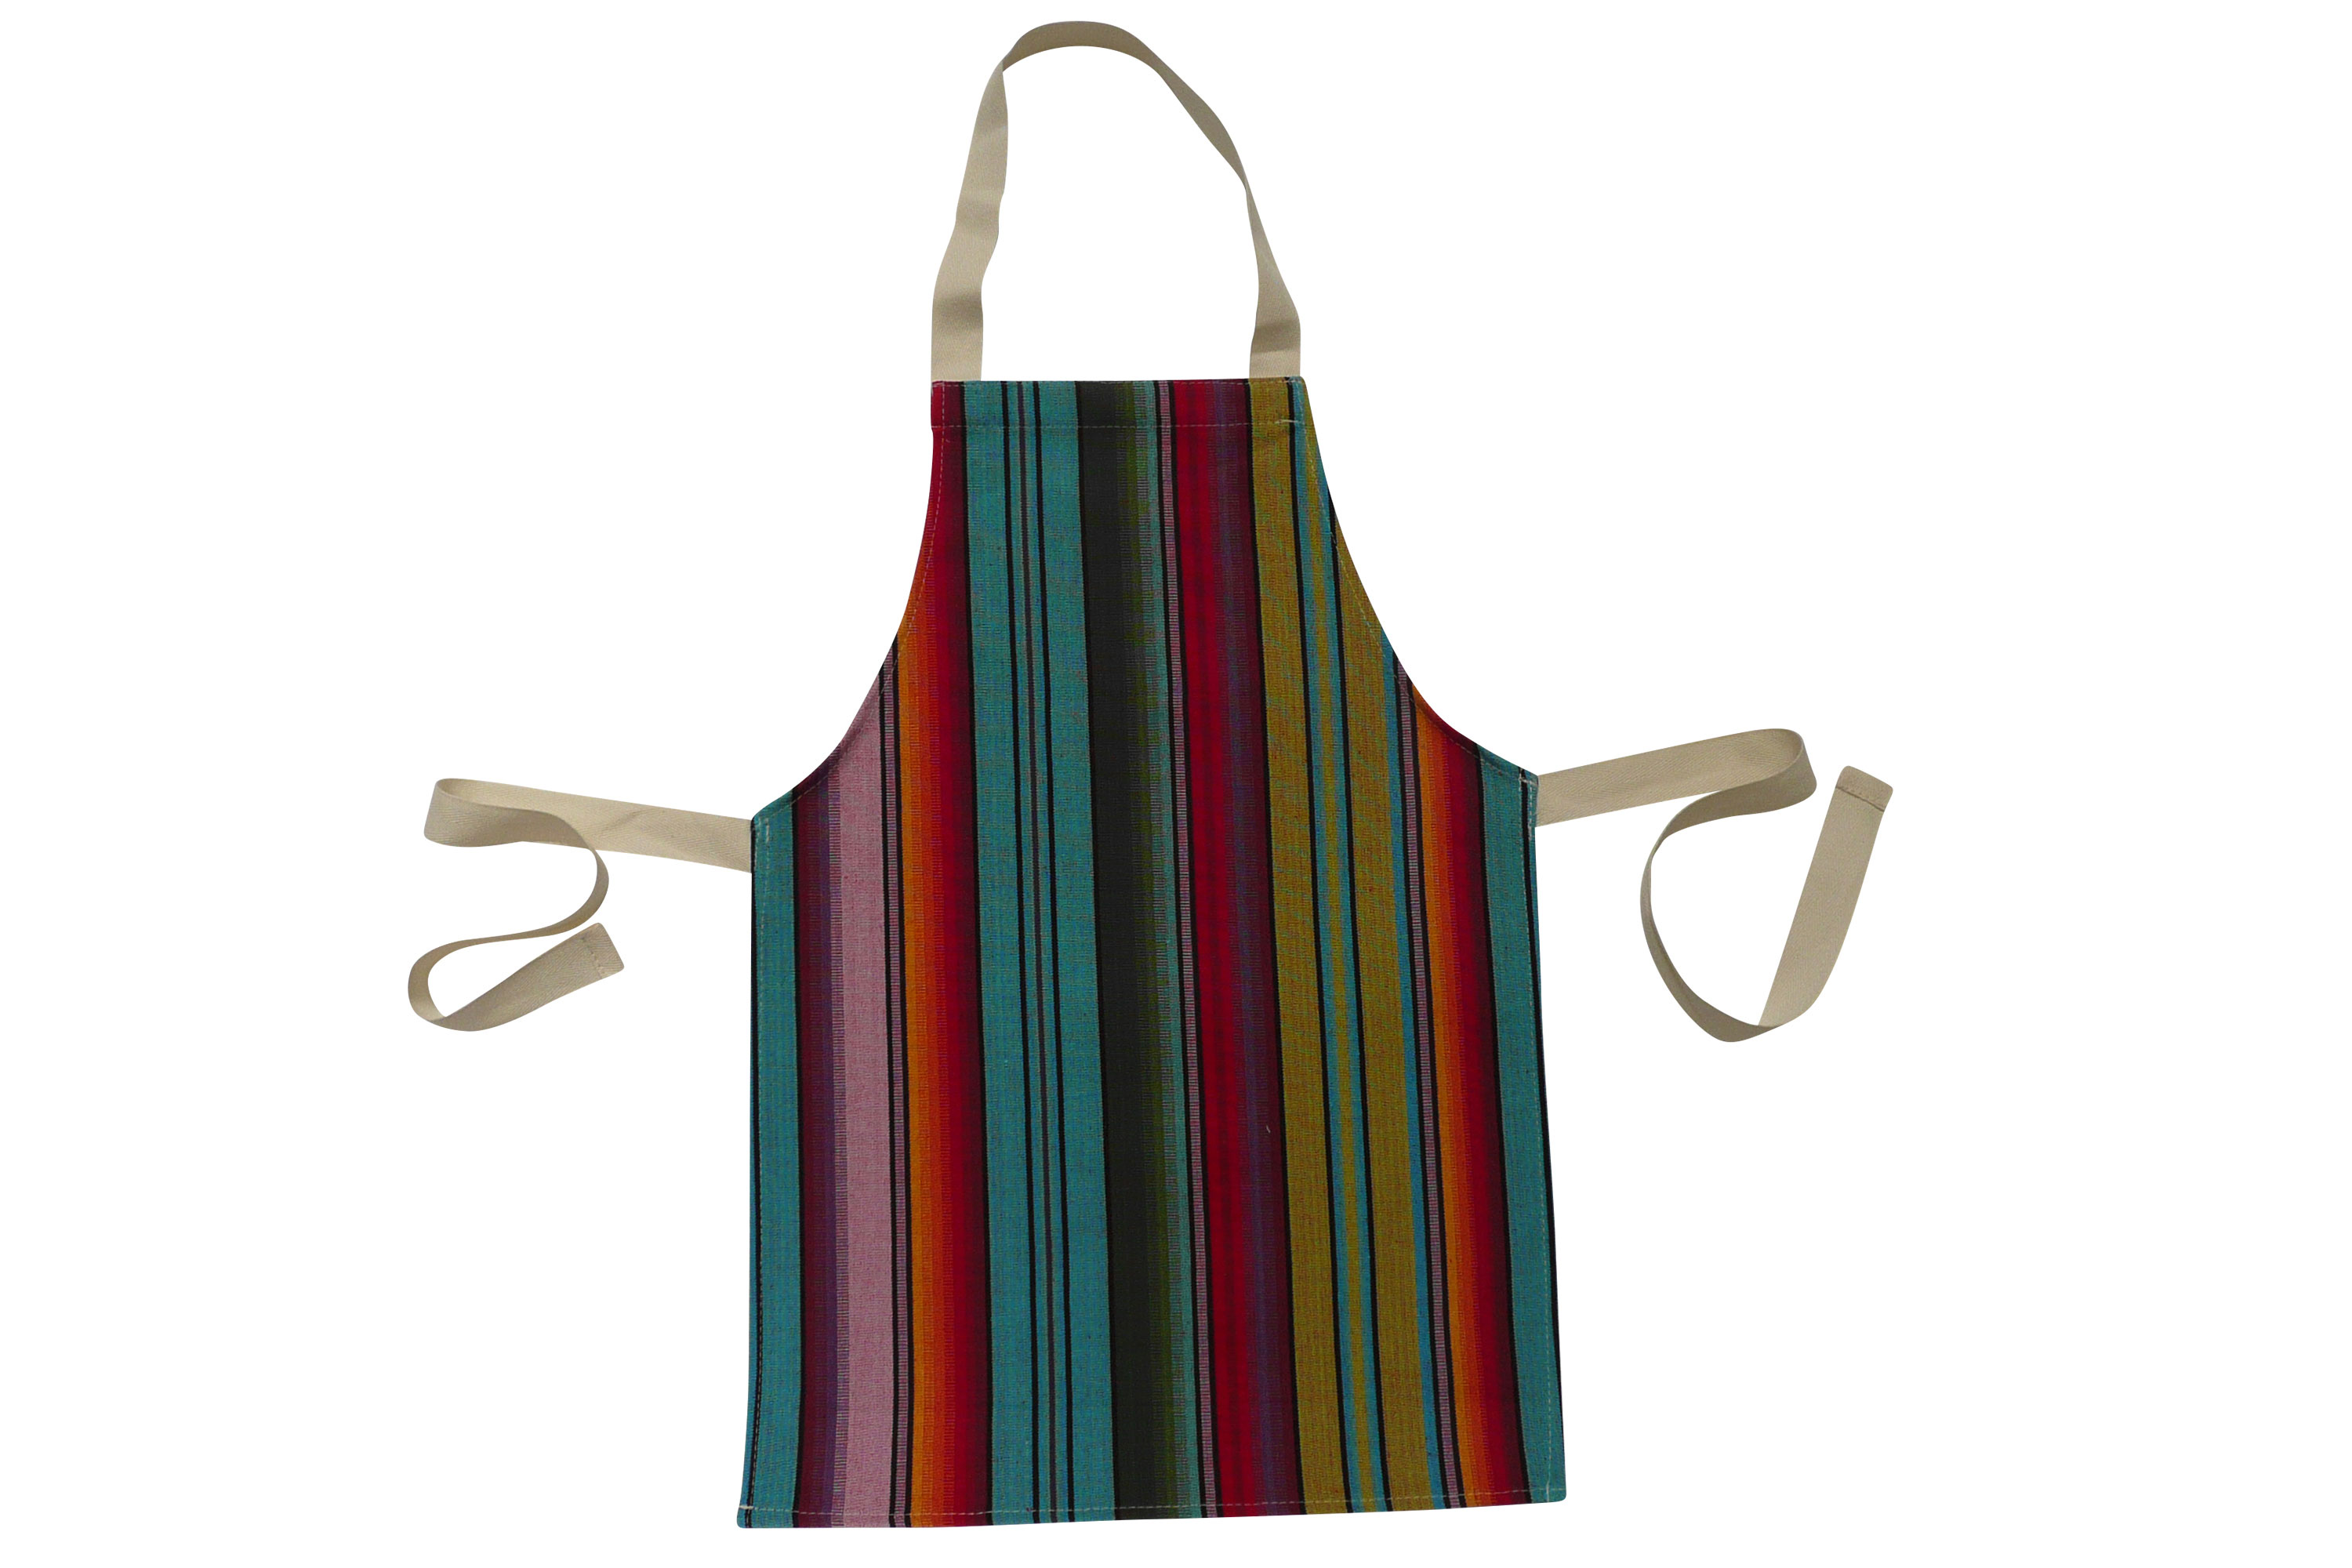 Blue Toddlers Aprons - Striped Aprons For Small Children Blue  Green  Orange  Stripes